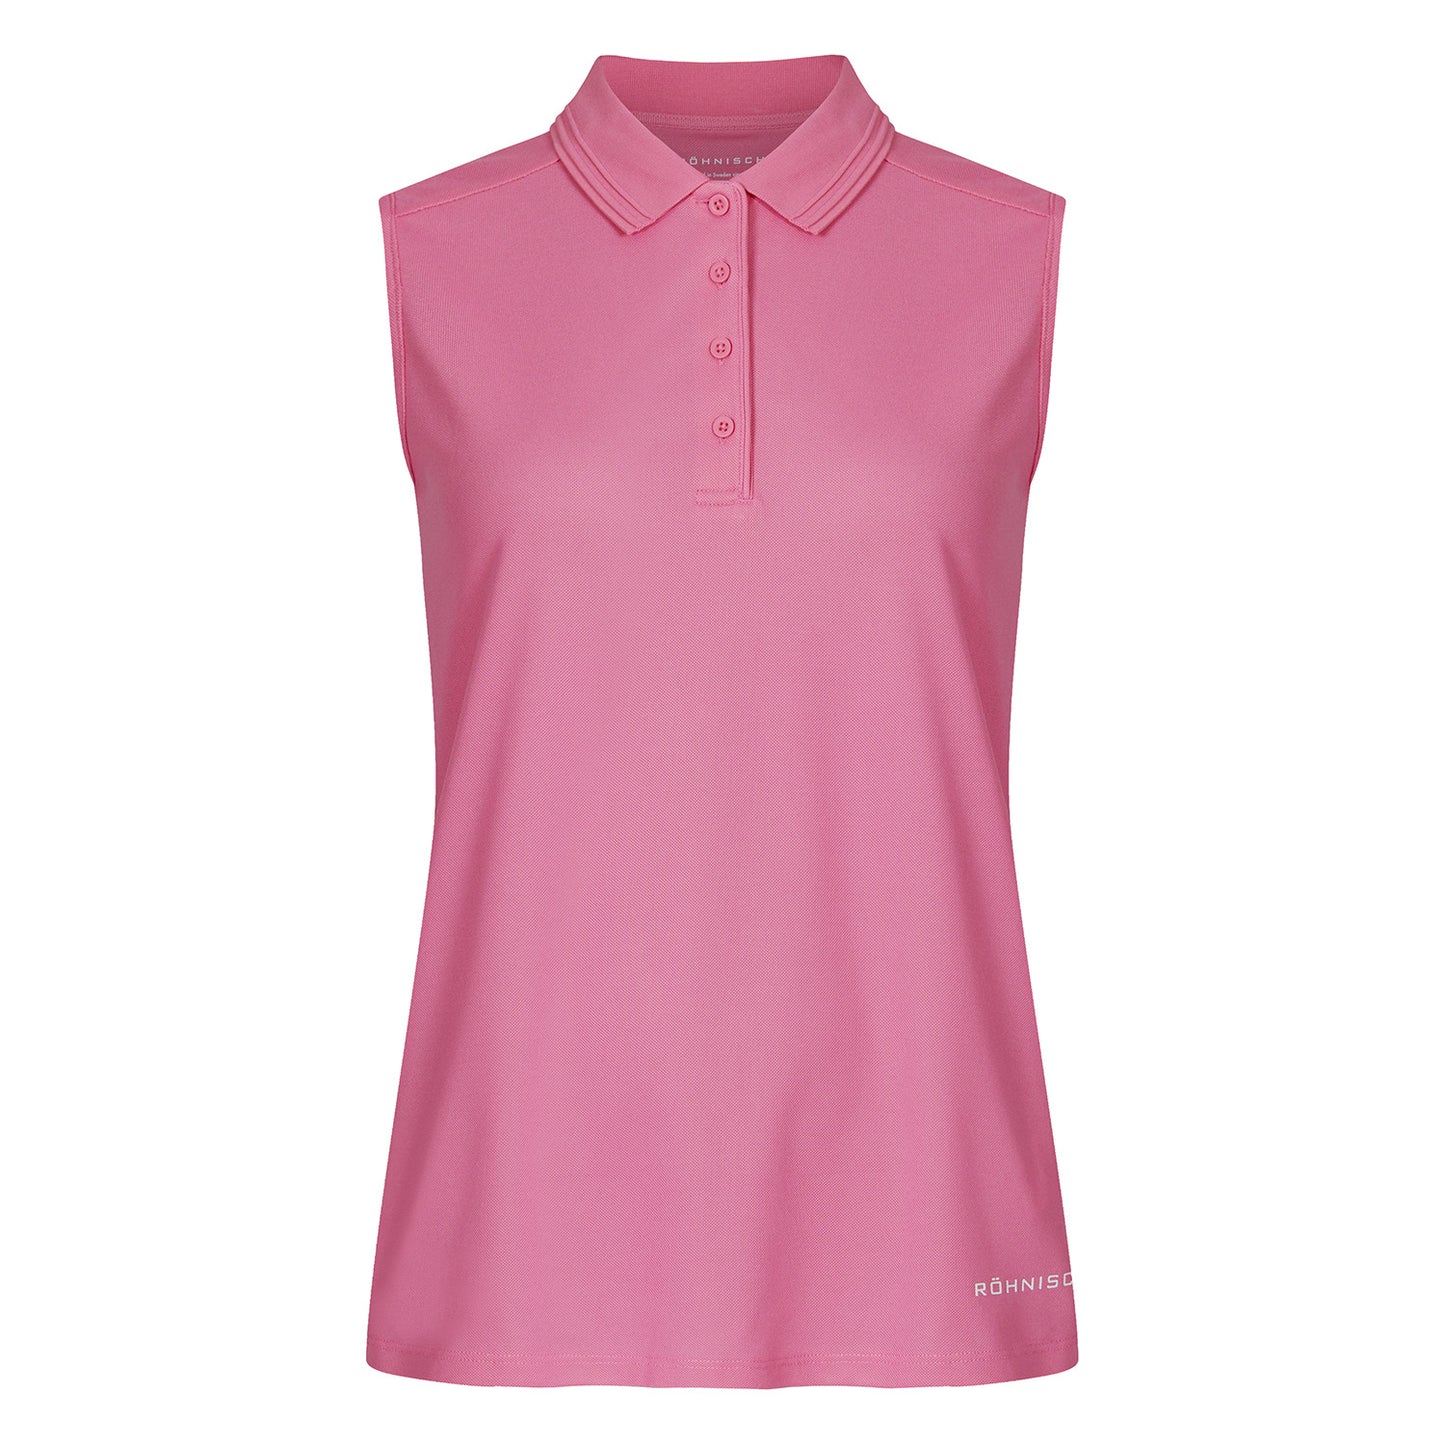 Rohnisch Ladies Sleeveless Polo with Textured Linear Trimmed Collar - Last One Small Only Left